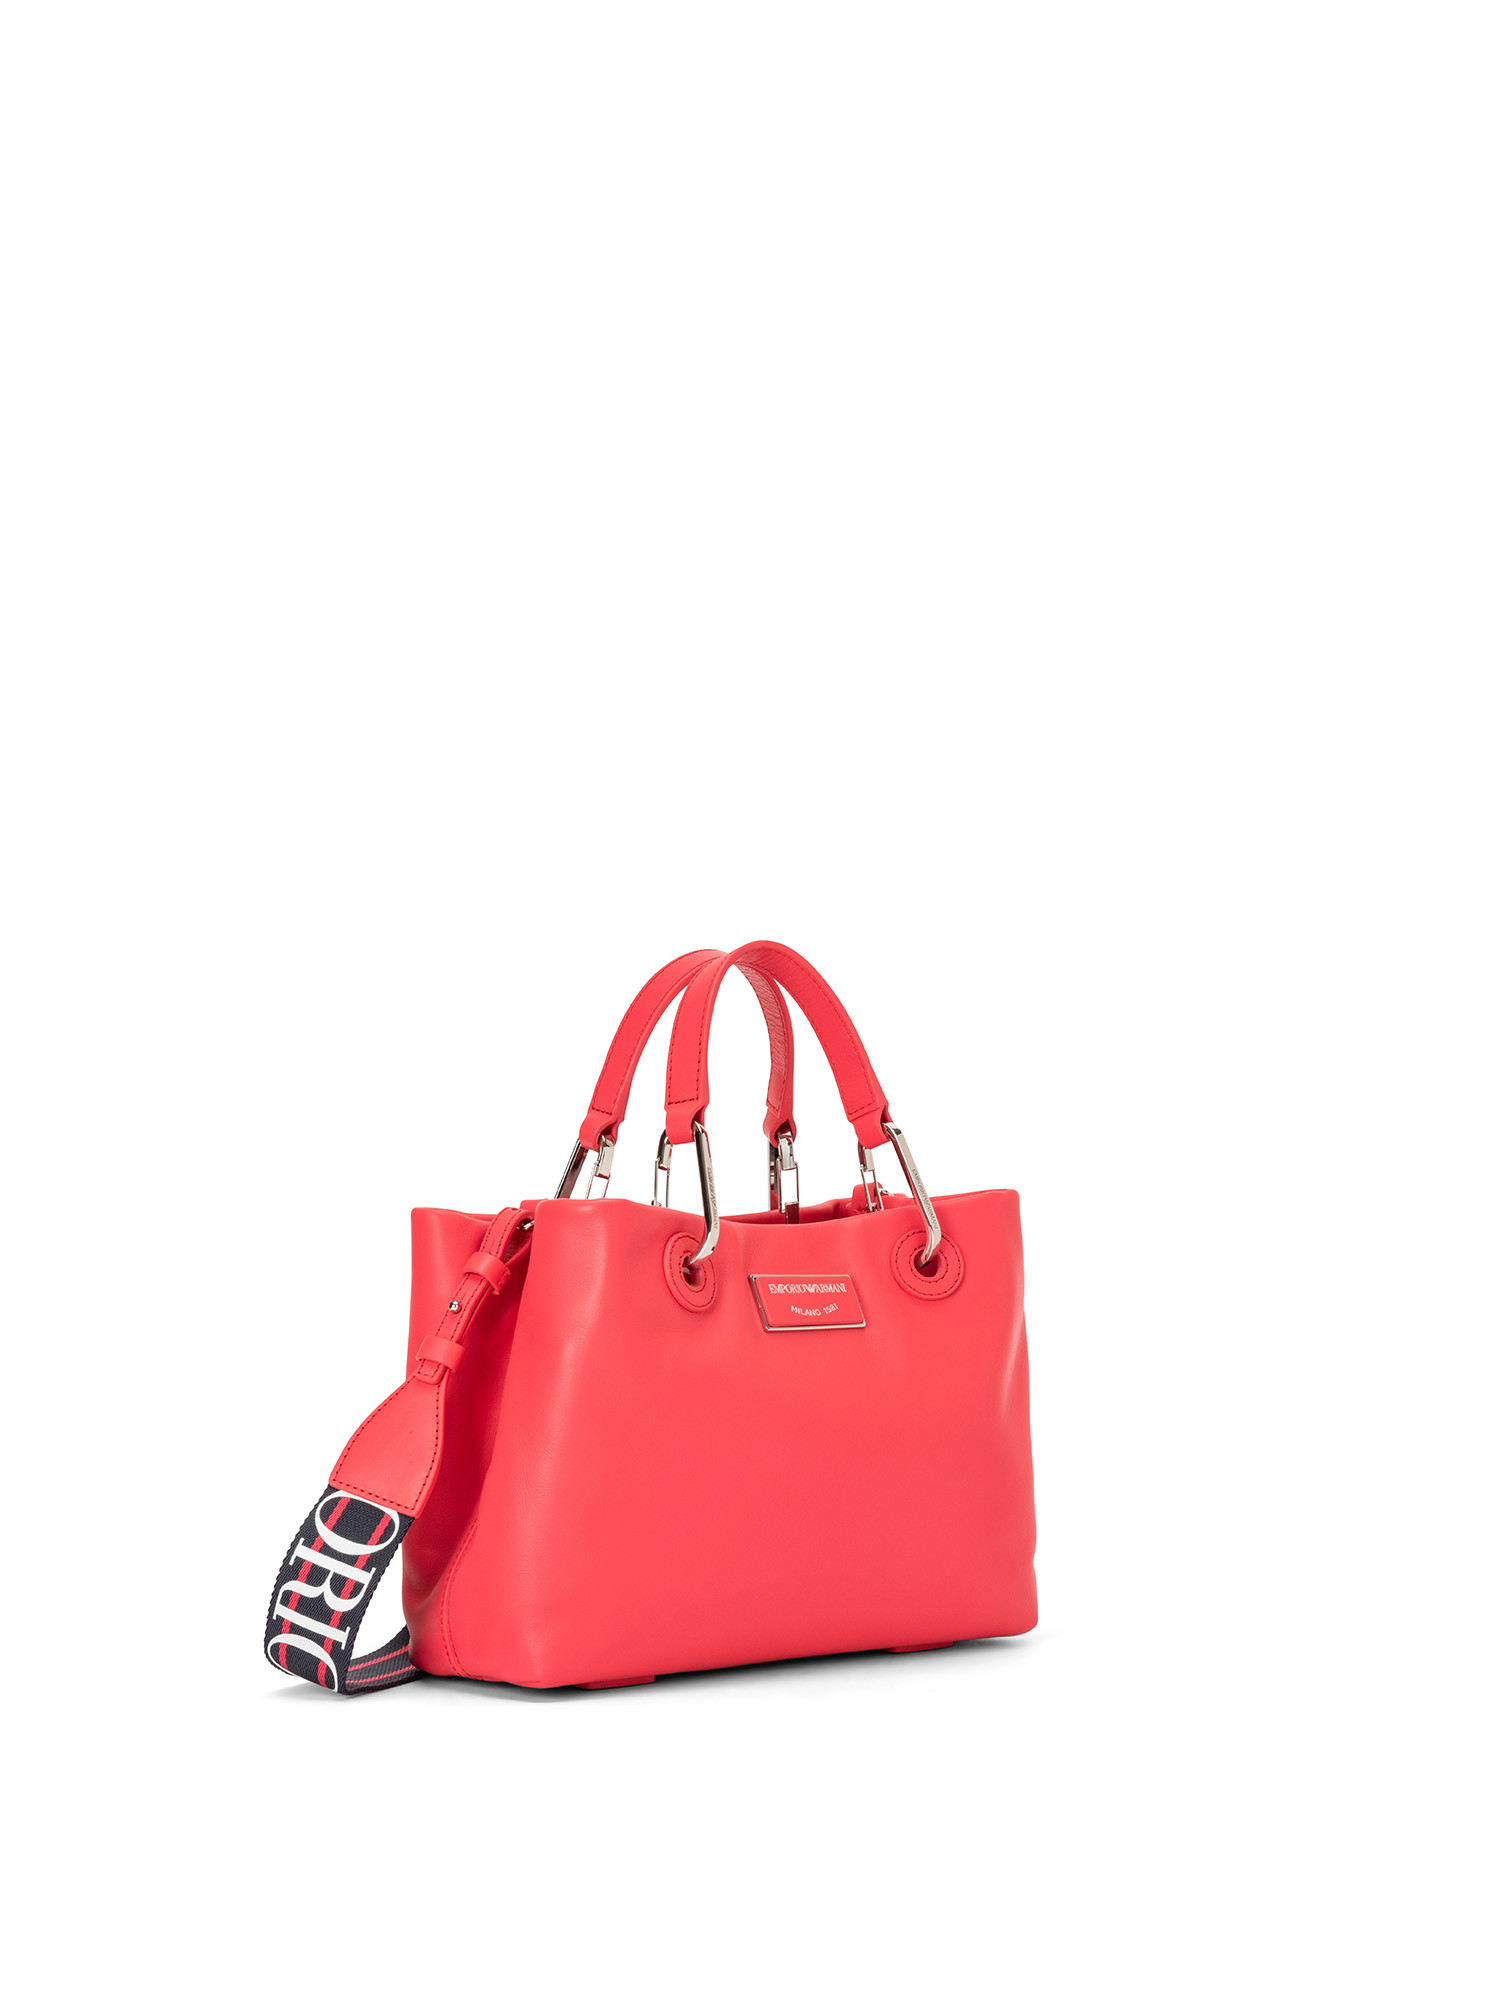 Emporio Armani - Shopper bag in pelle ecologica, Rosso, large image number 1